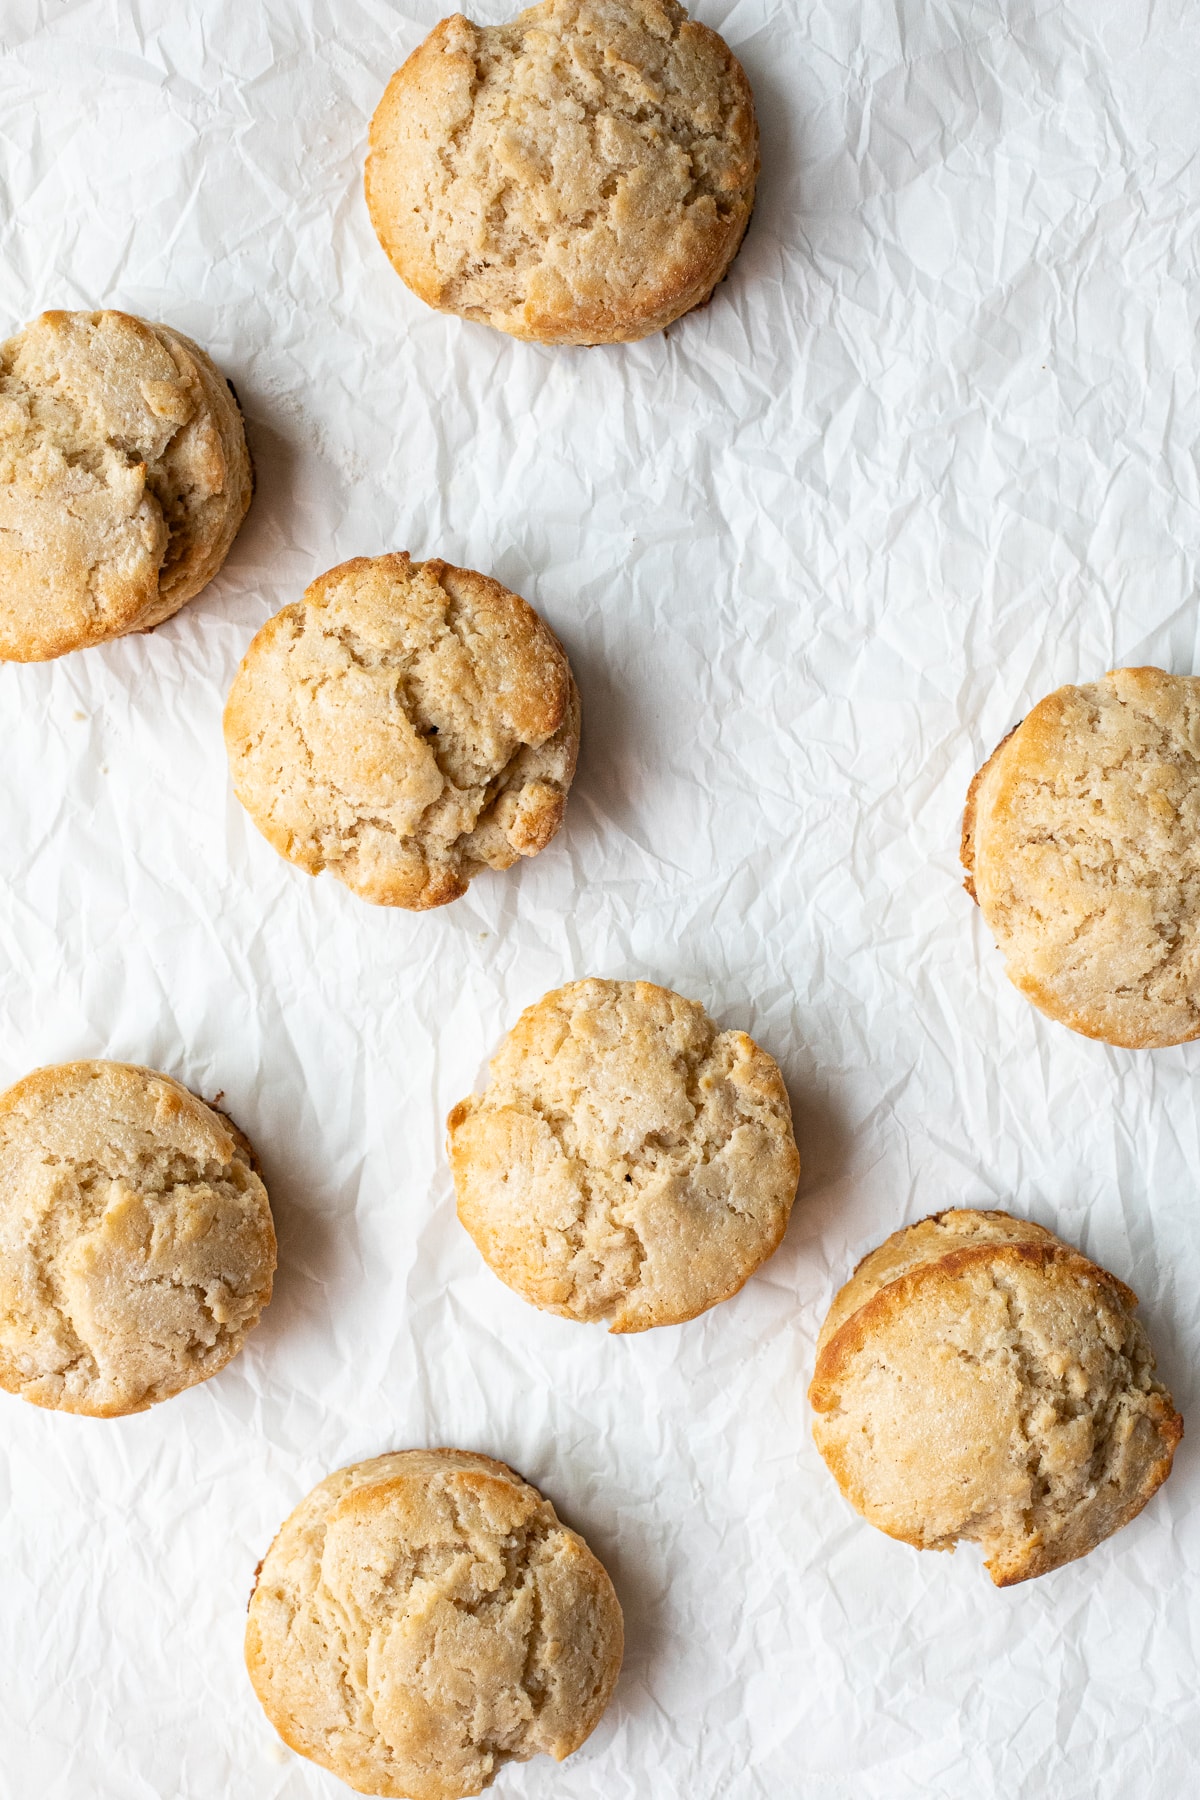 Overhead view of biscuits scattered across a sheet of crumpled parchment paper.